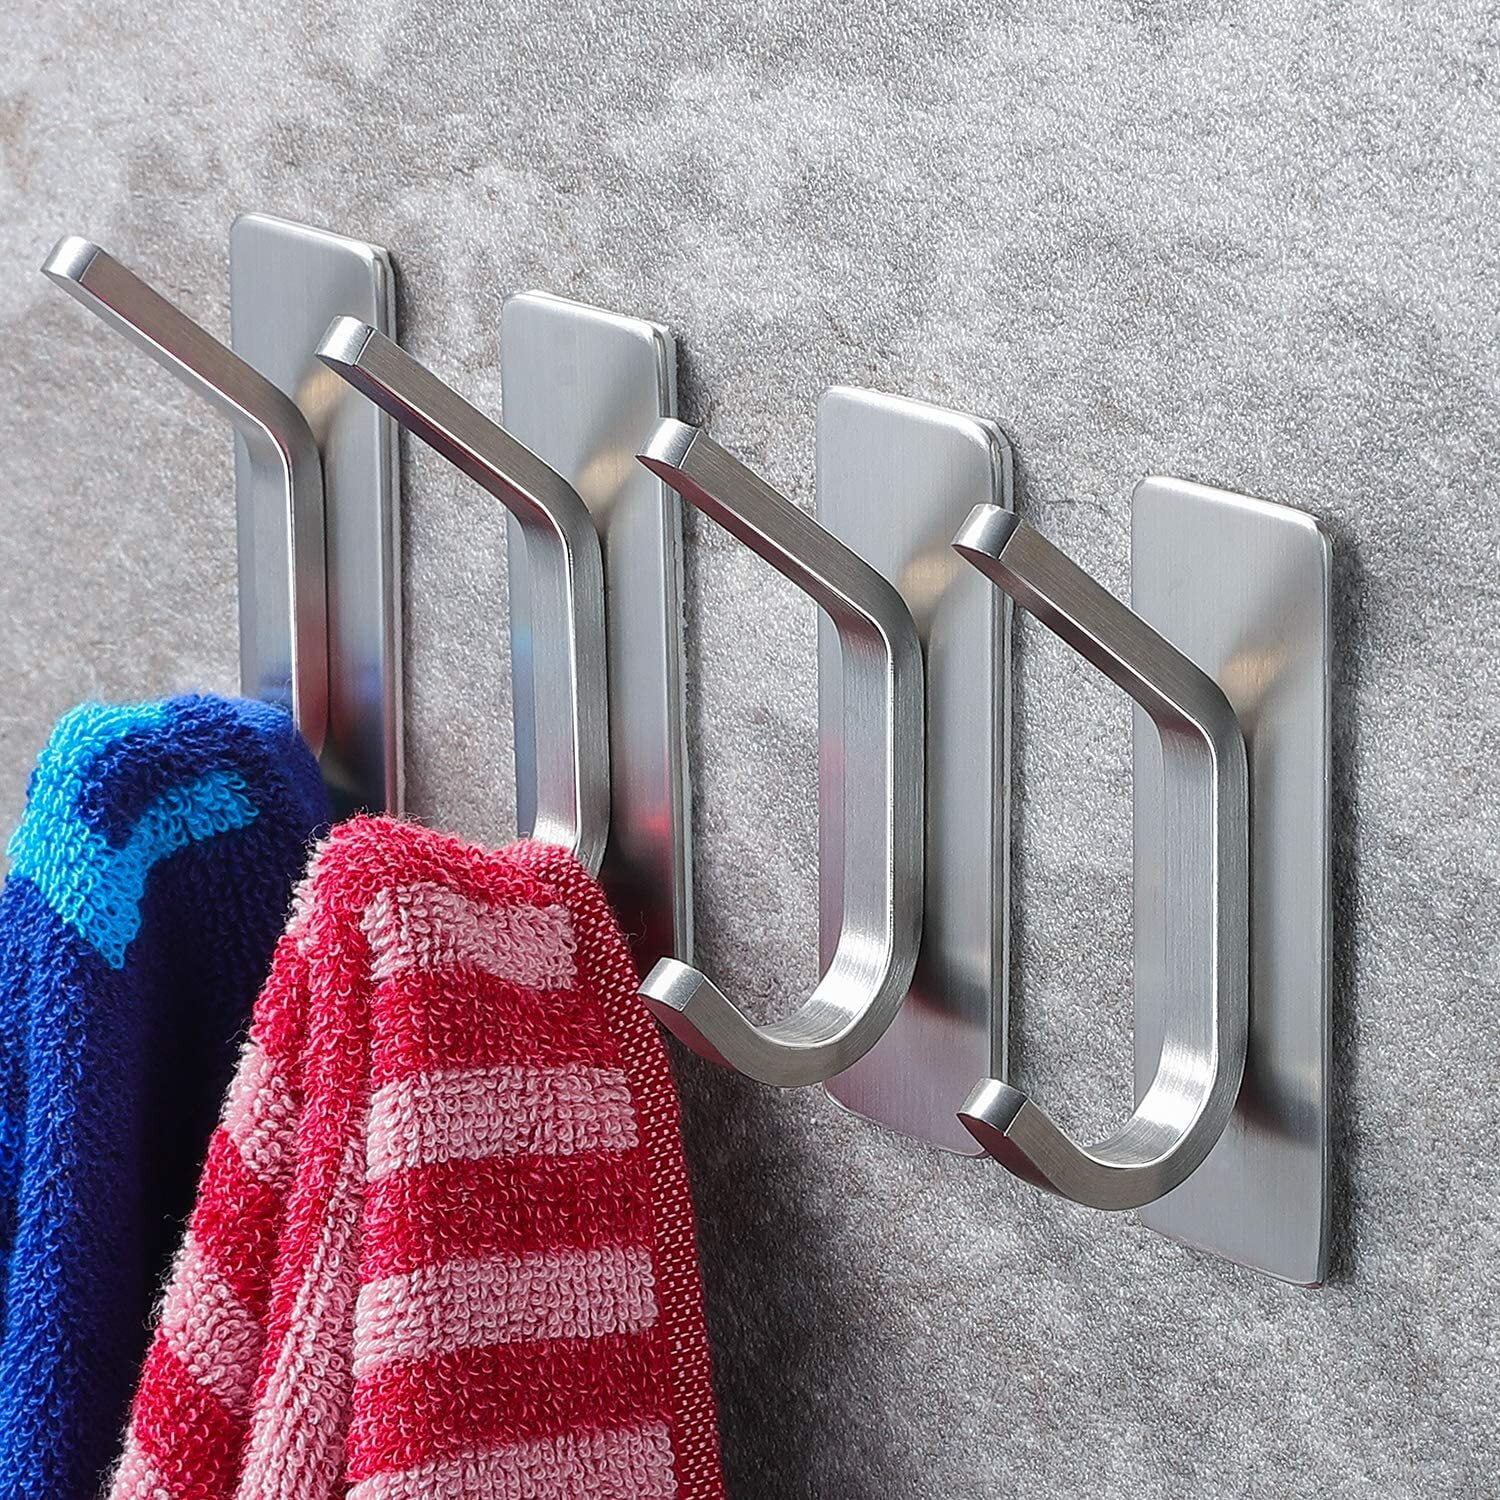 4 Pcs White Towel Adhesive Hooks for Tile Wall Stainless Steel Wall Hangers  of Heavy Duty Shower Stick on Hooks for Coat,Hat,Key Wall Sticky Hooks